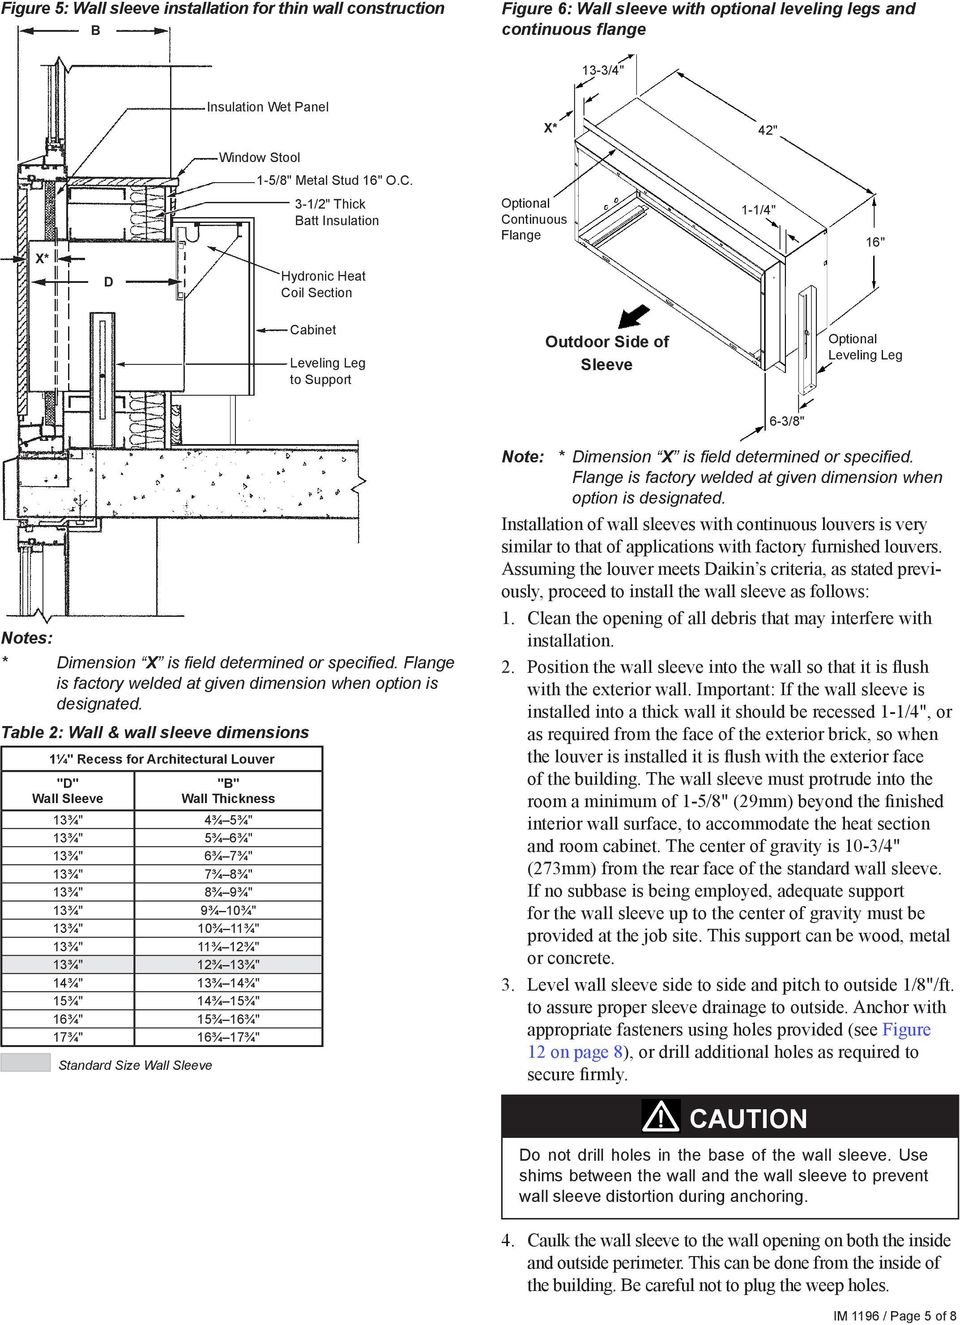 3-1/2" Thick Batt Insulation Hydronic Heat Coil Section Continuous Flange 1-1/4" Cabinet Leveling Leg to Support Outdoor Side of Sleeve Leveling Leg 6-3/8" Notes: * Dimension X is field determined or